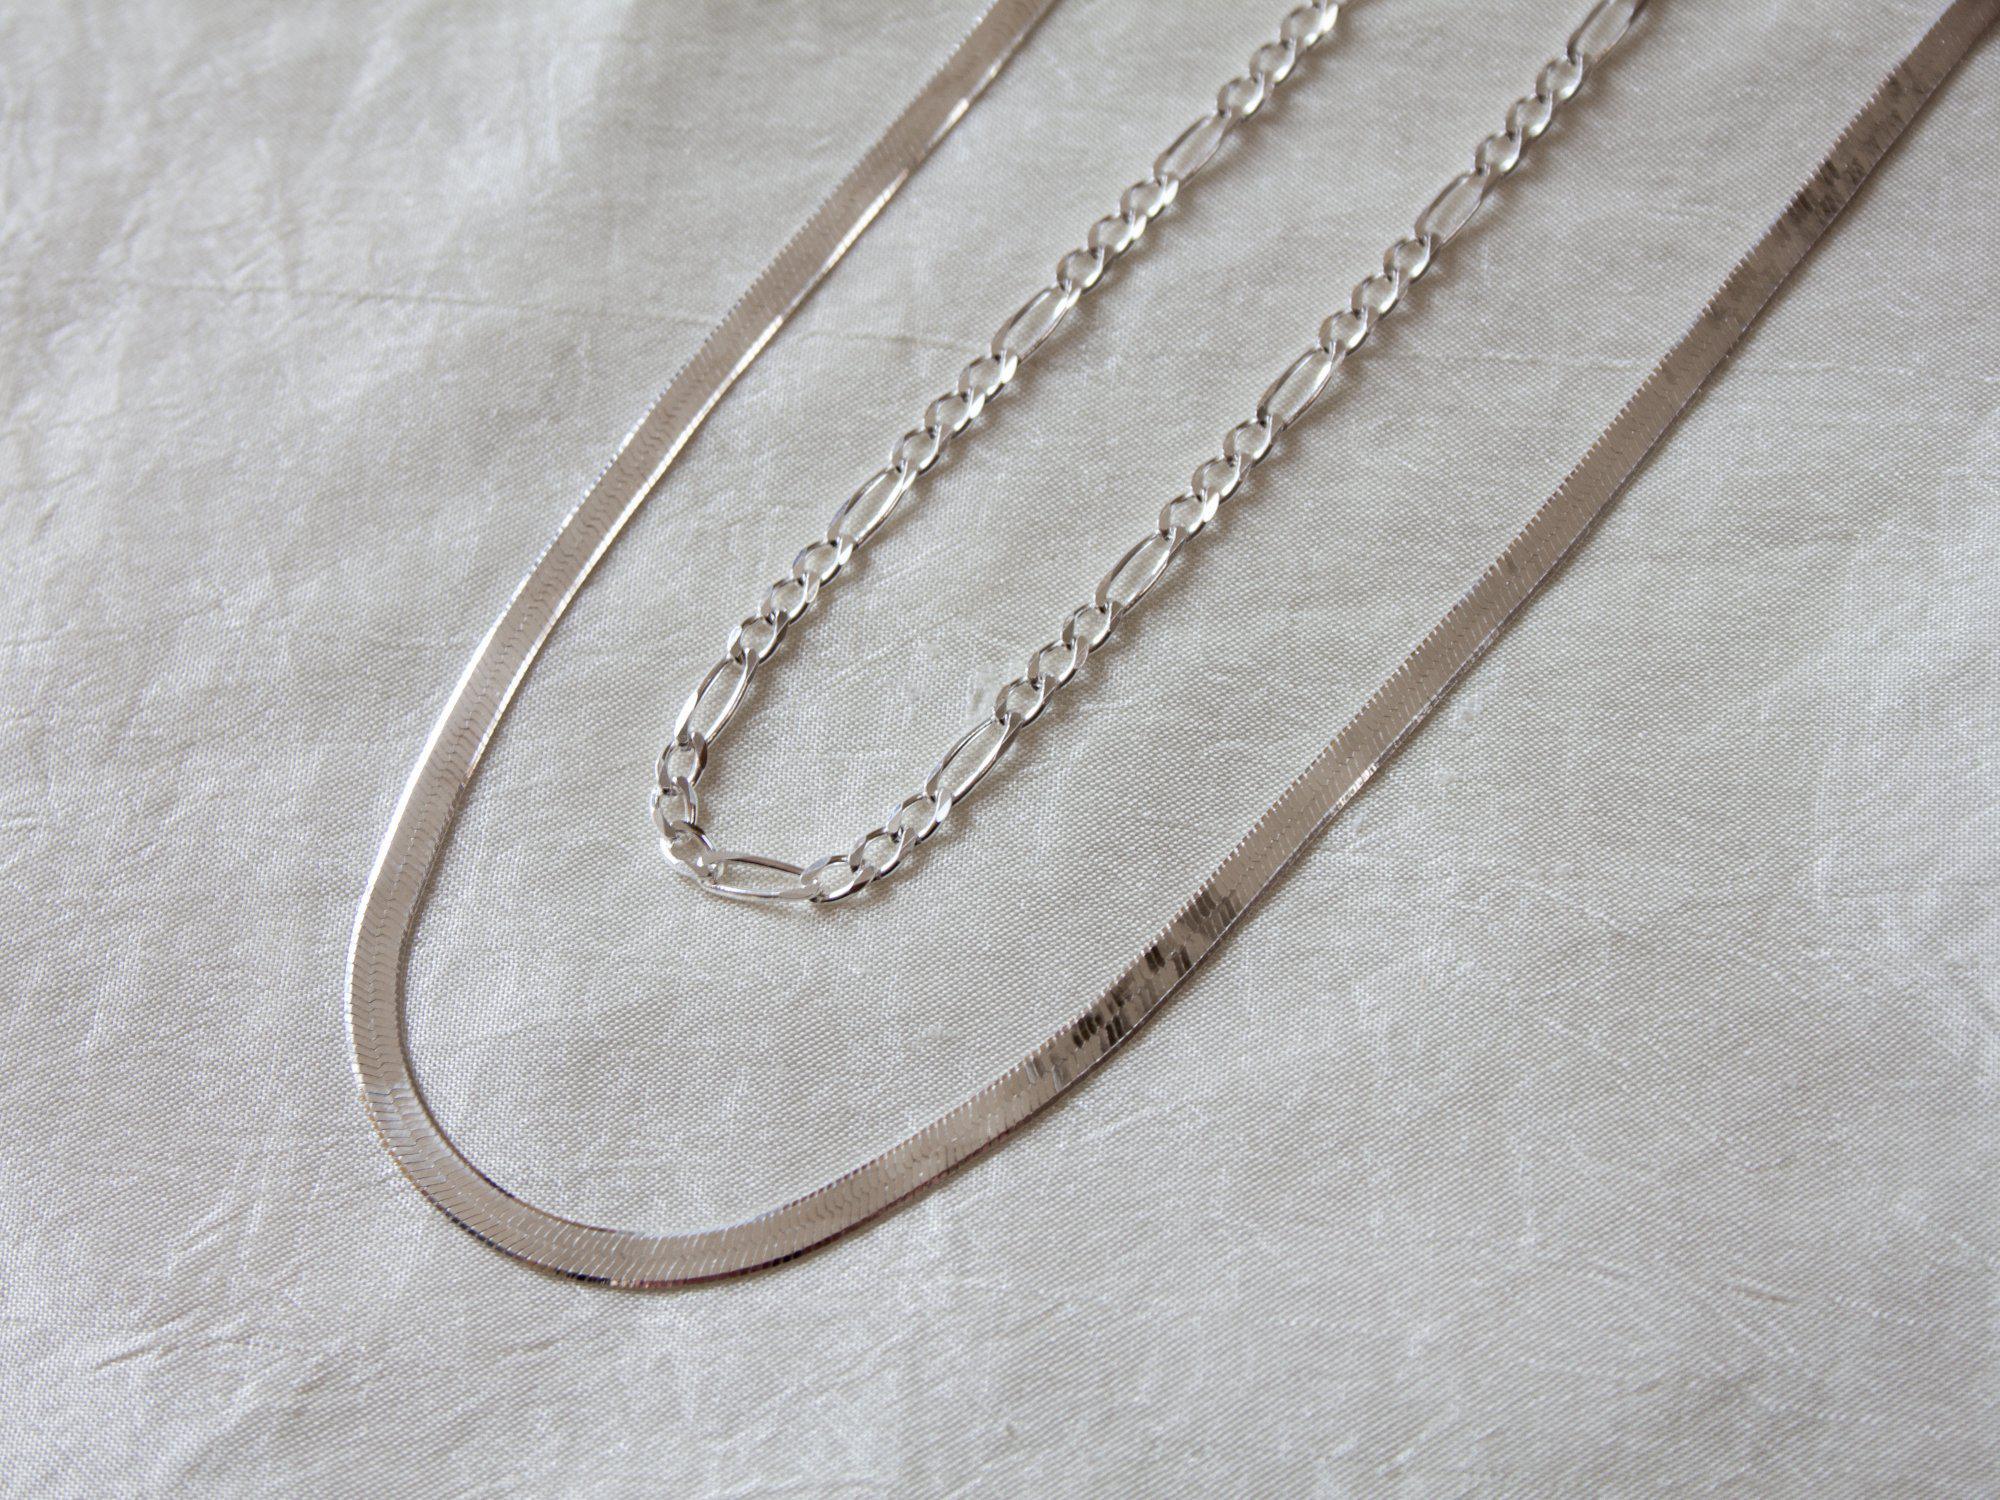 Silver Herringbone and Thin Figaro Necklace Chain Set - Layered Necklace Set -  Dea Dia